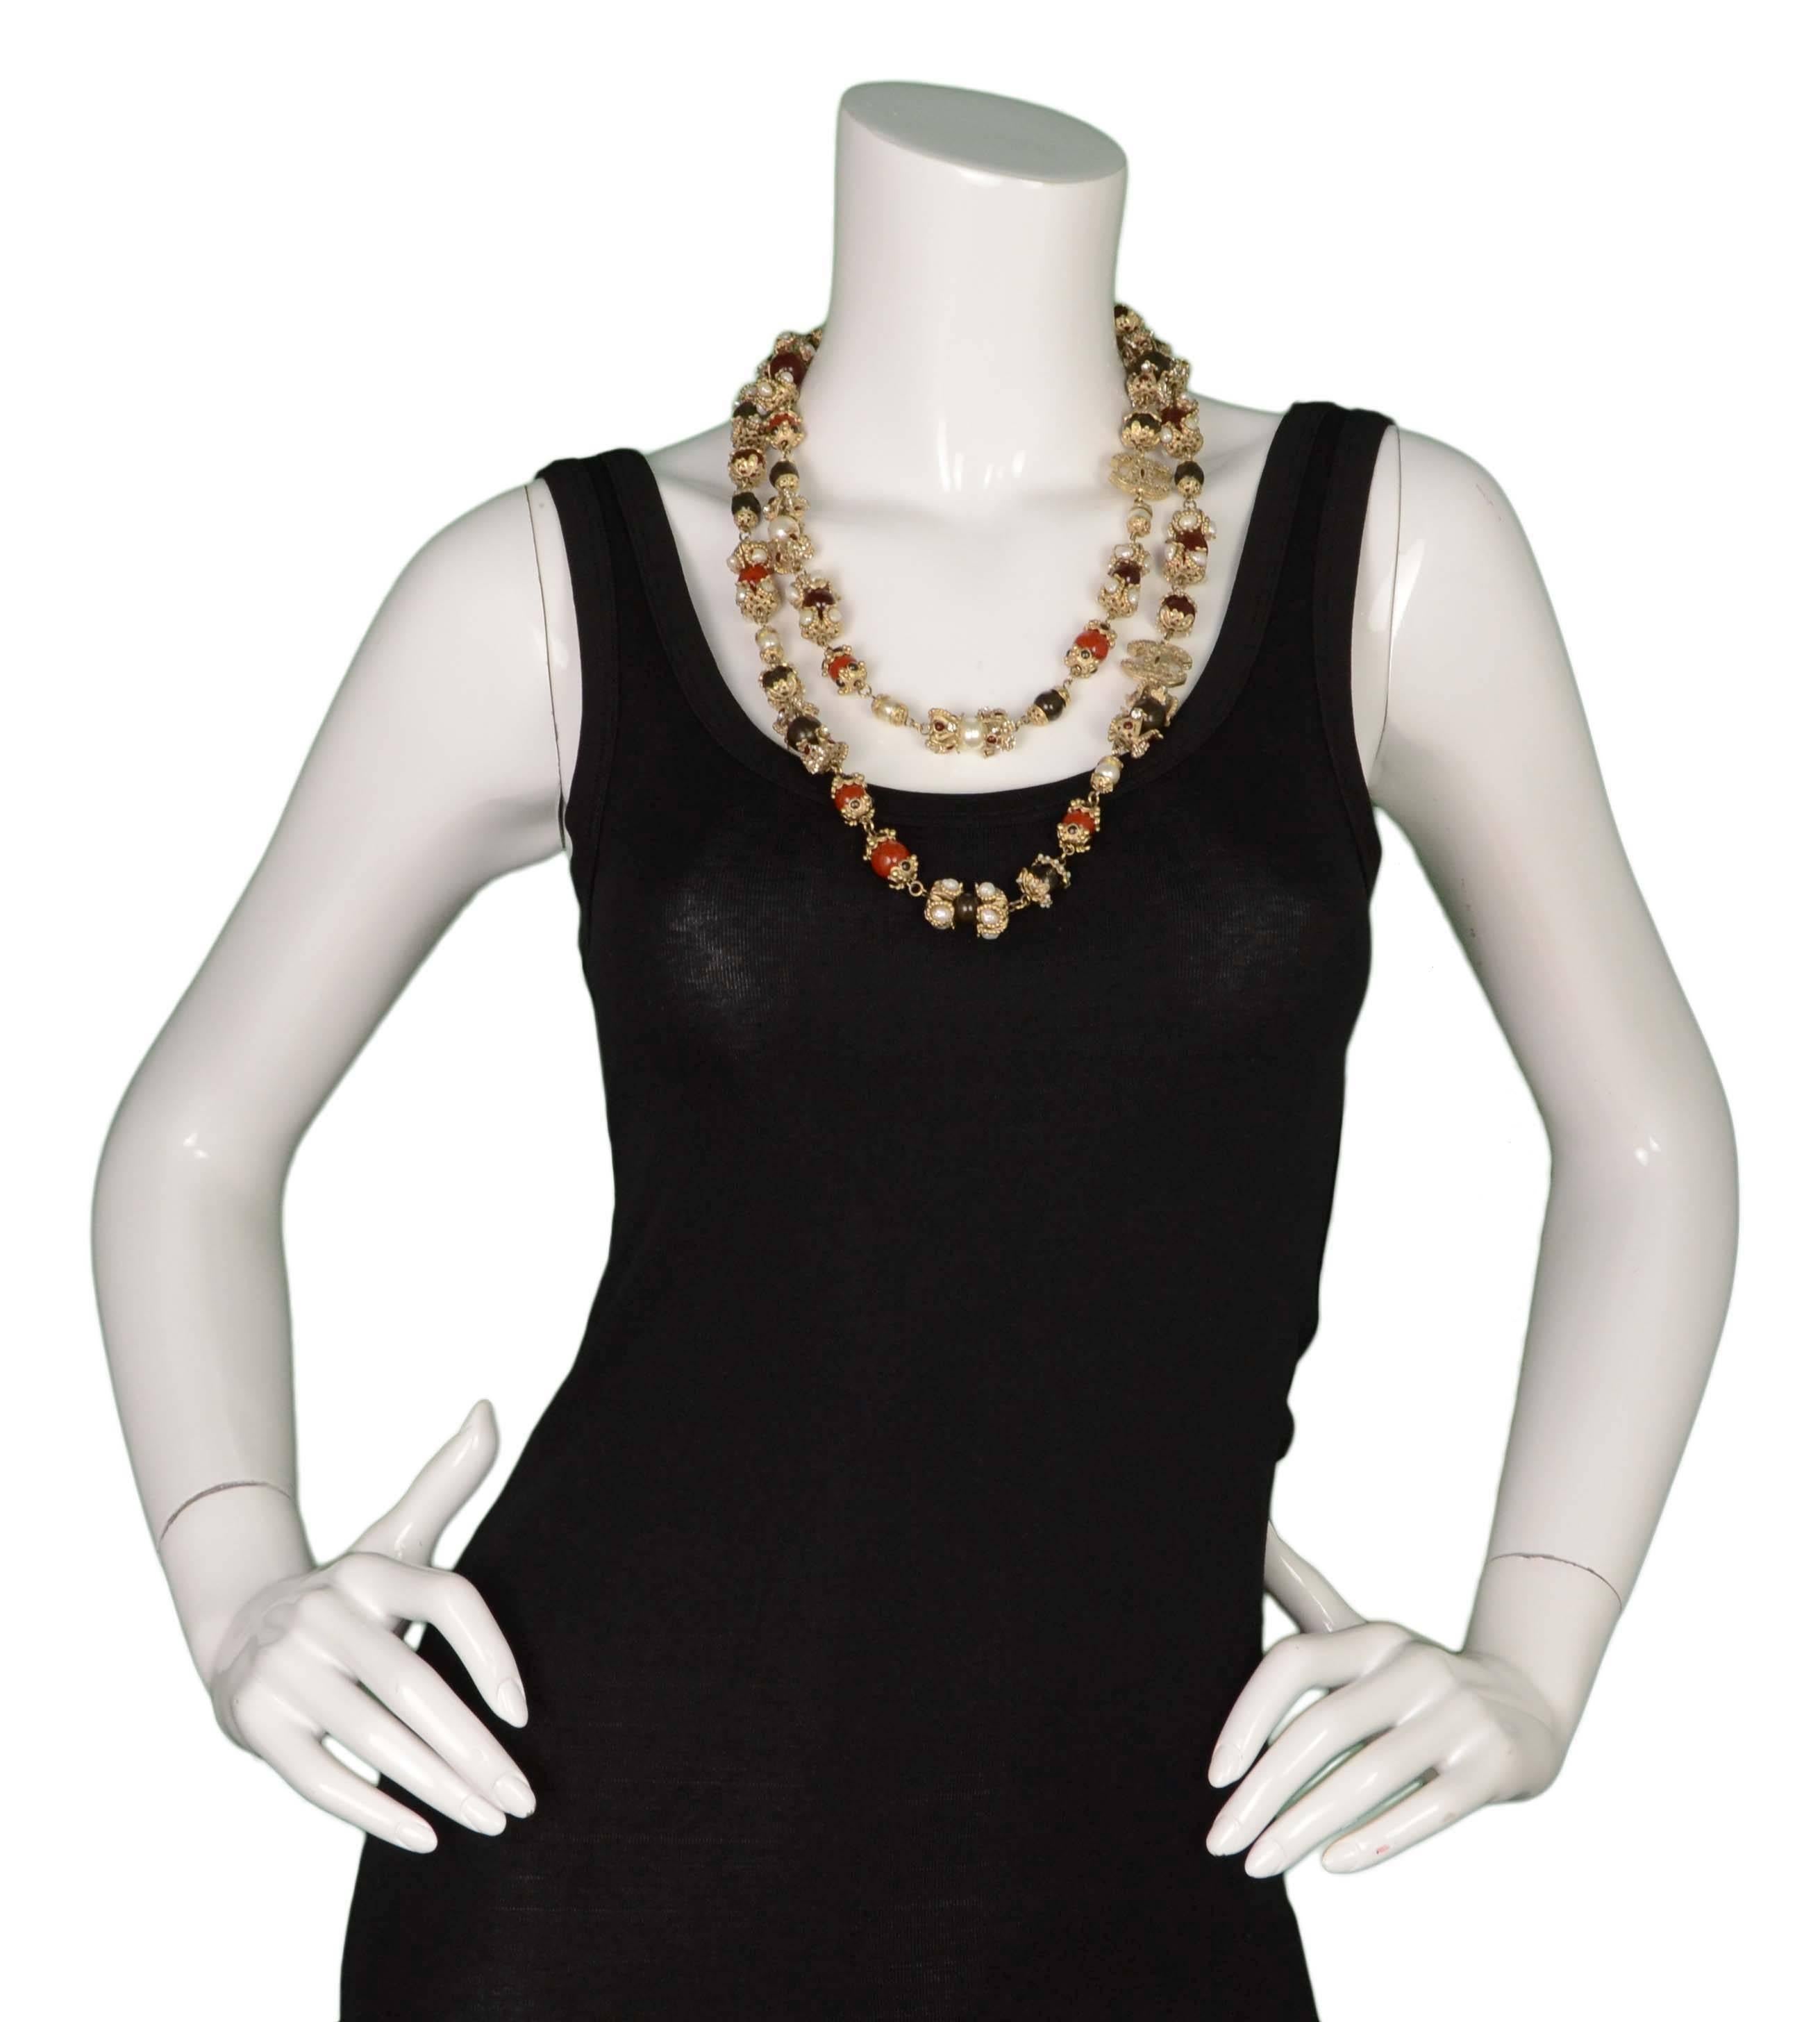 Women's Chanel Paris/Moscow Runway Bead & Pearl Necklace